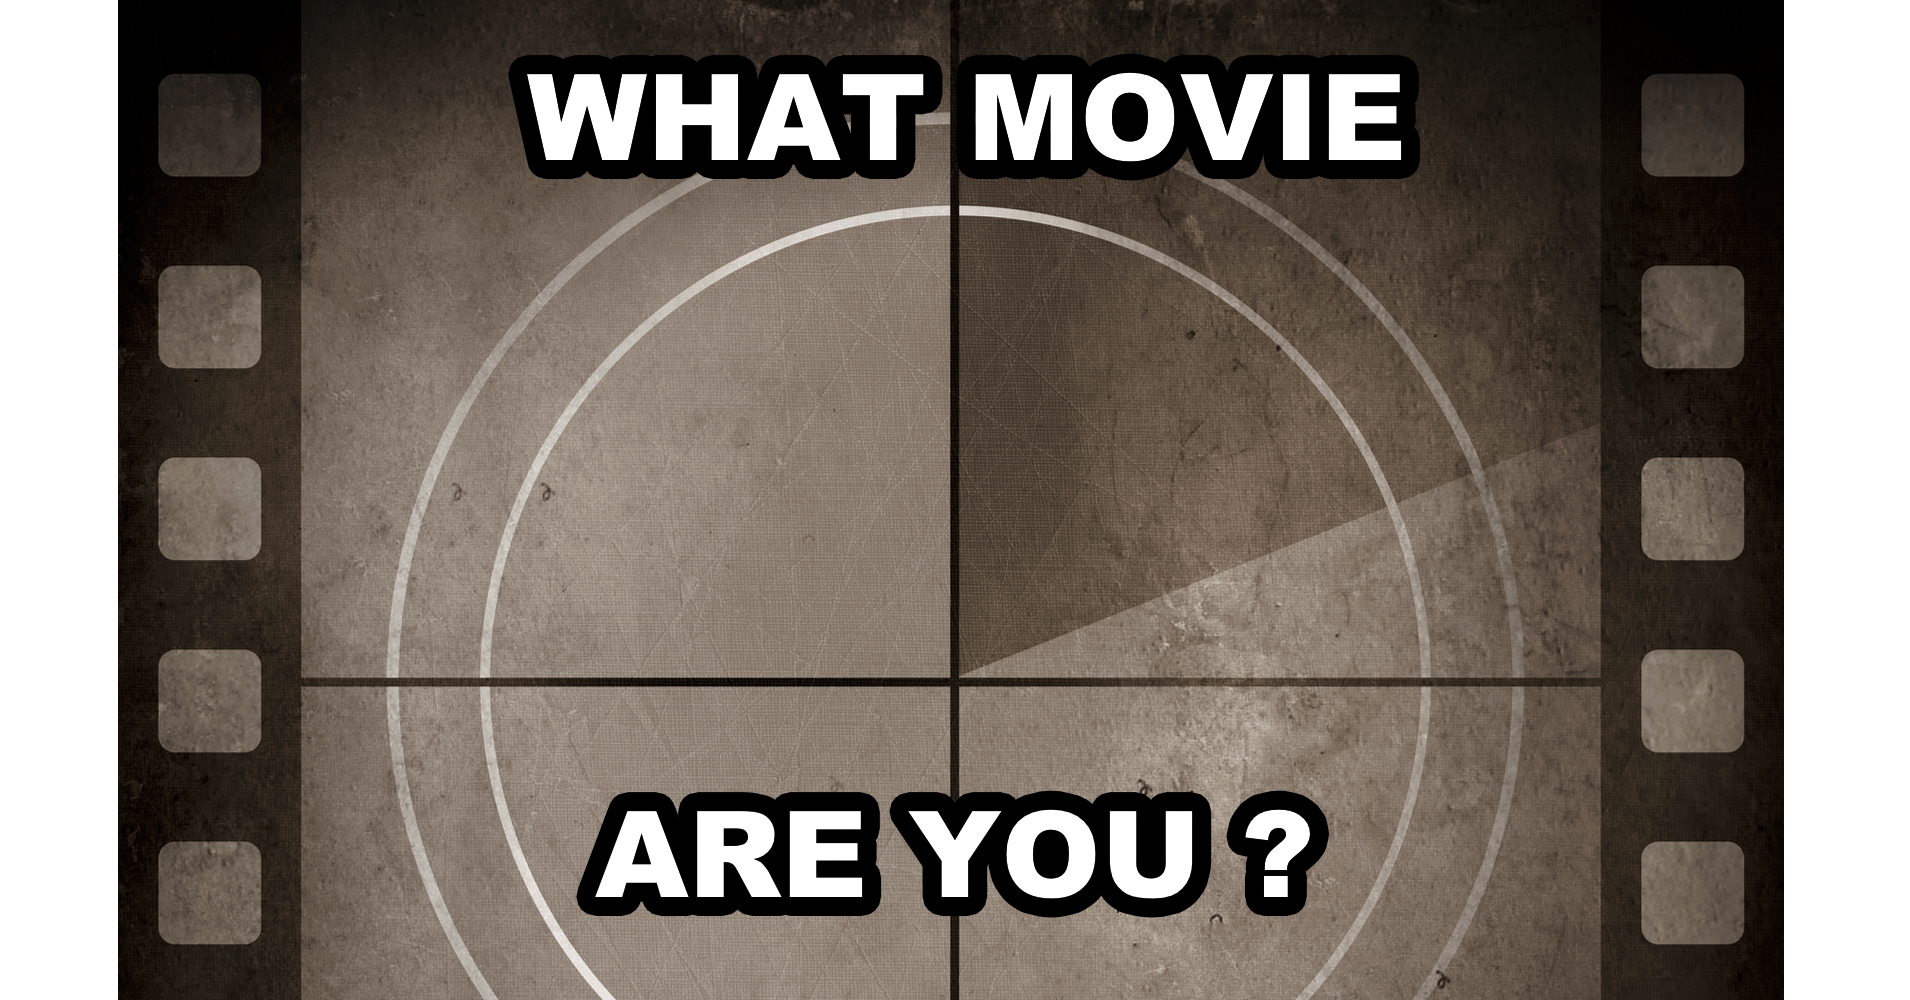 What Movie Are You? - Quiz Result